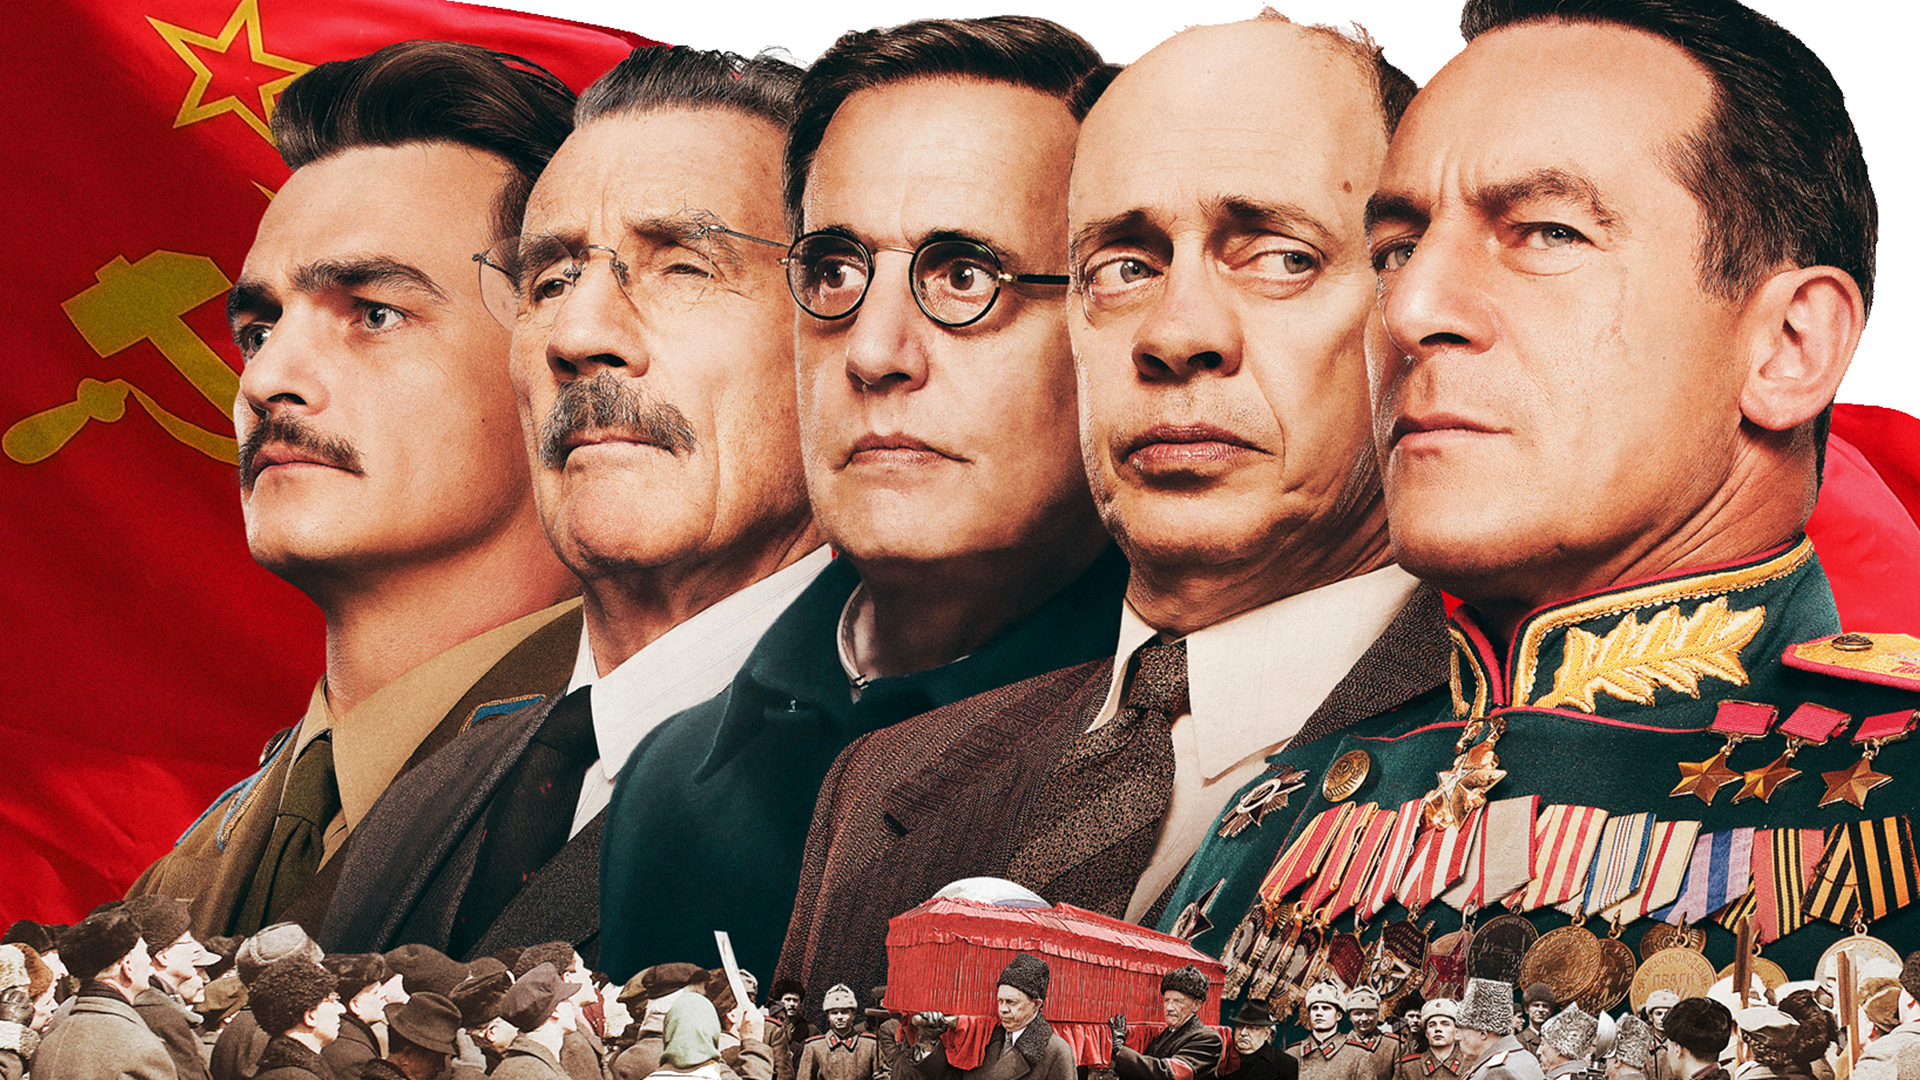 The Death Of Stalin - Death Of Stalin Movie , HD Wallpaper & Backgrounds